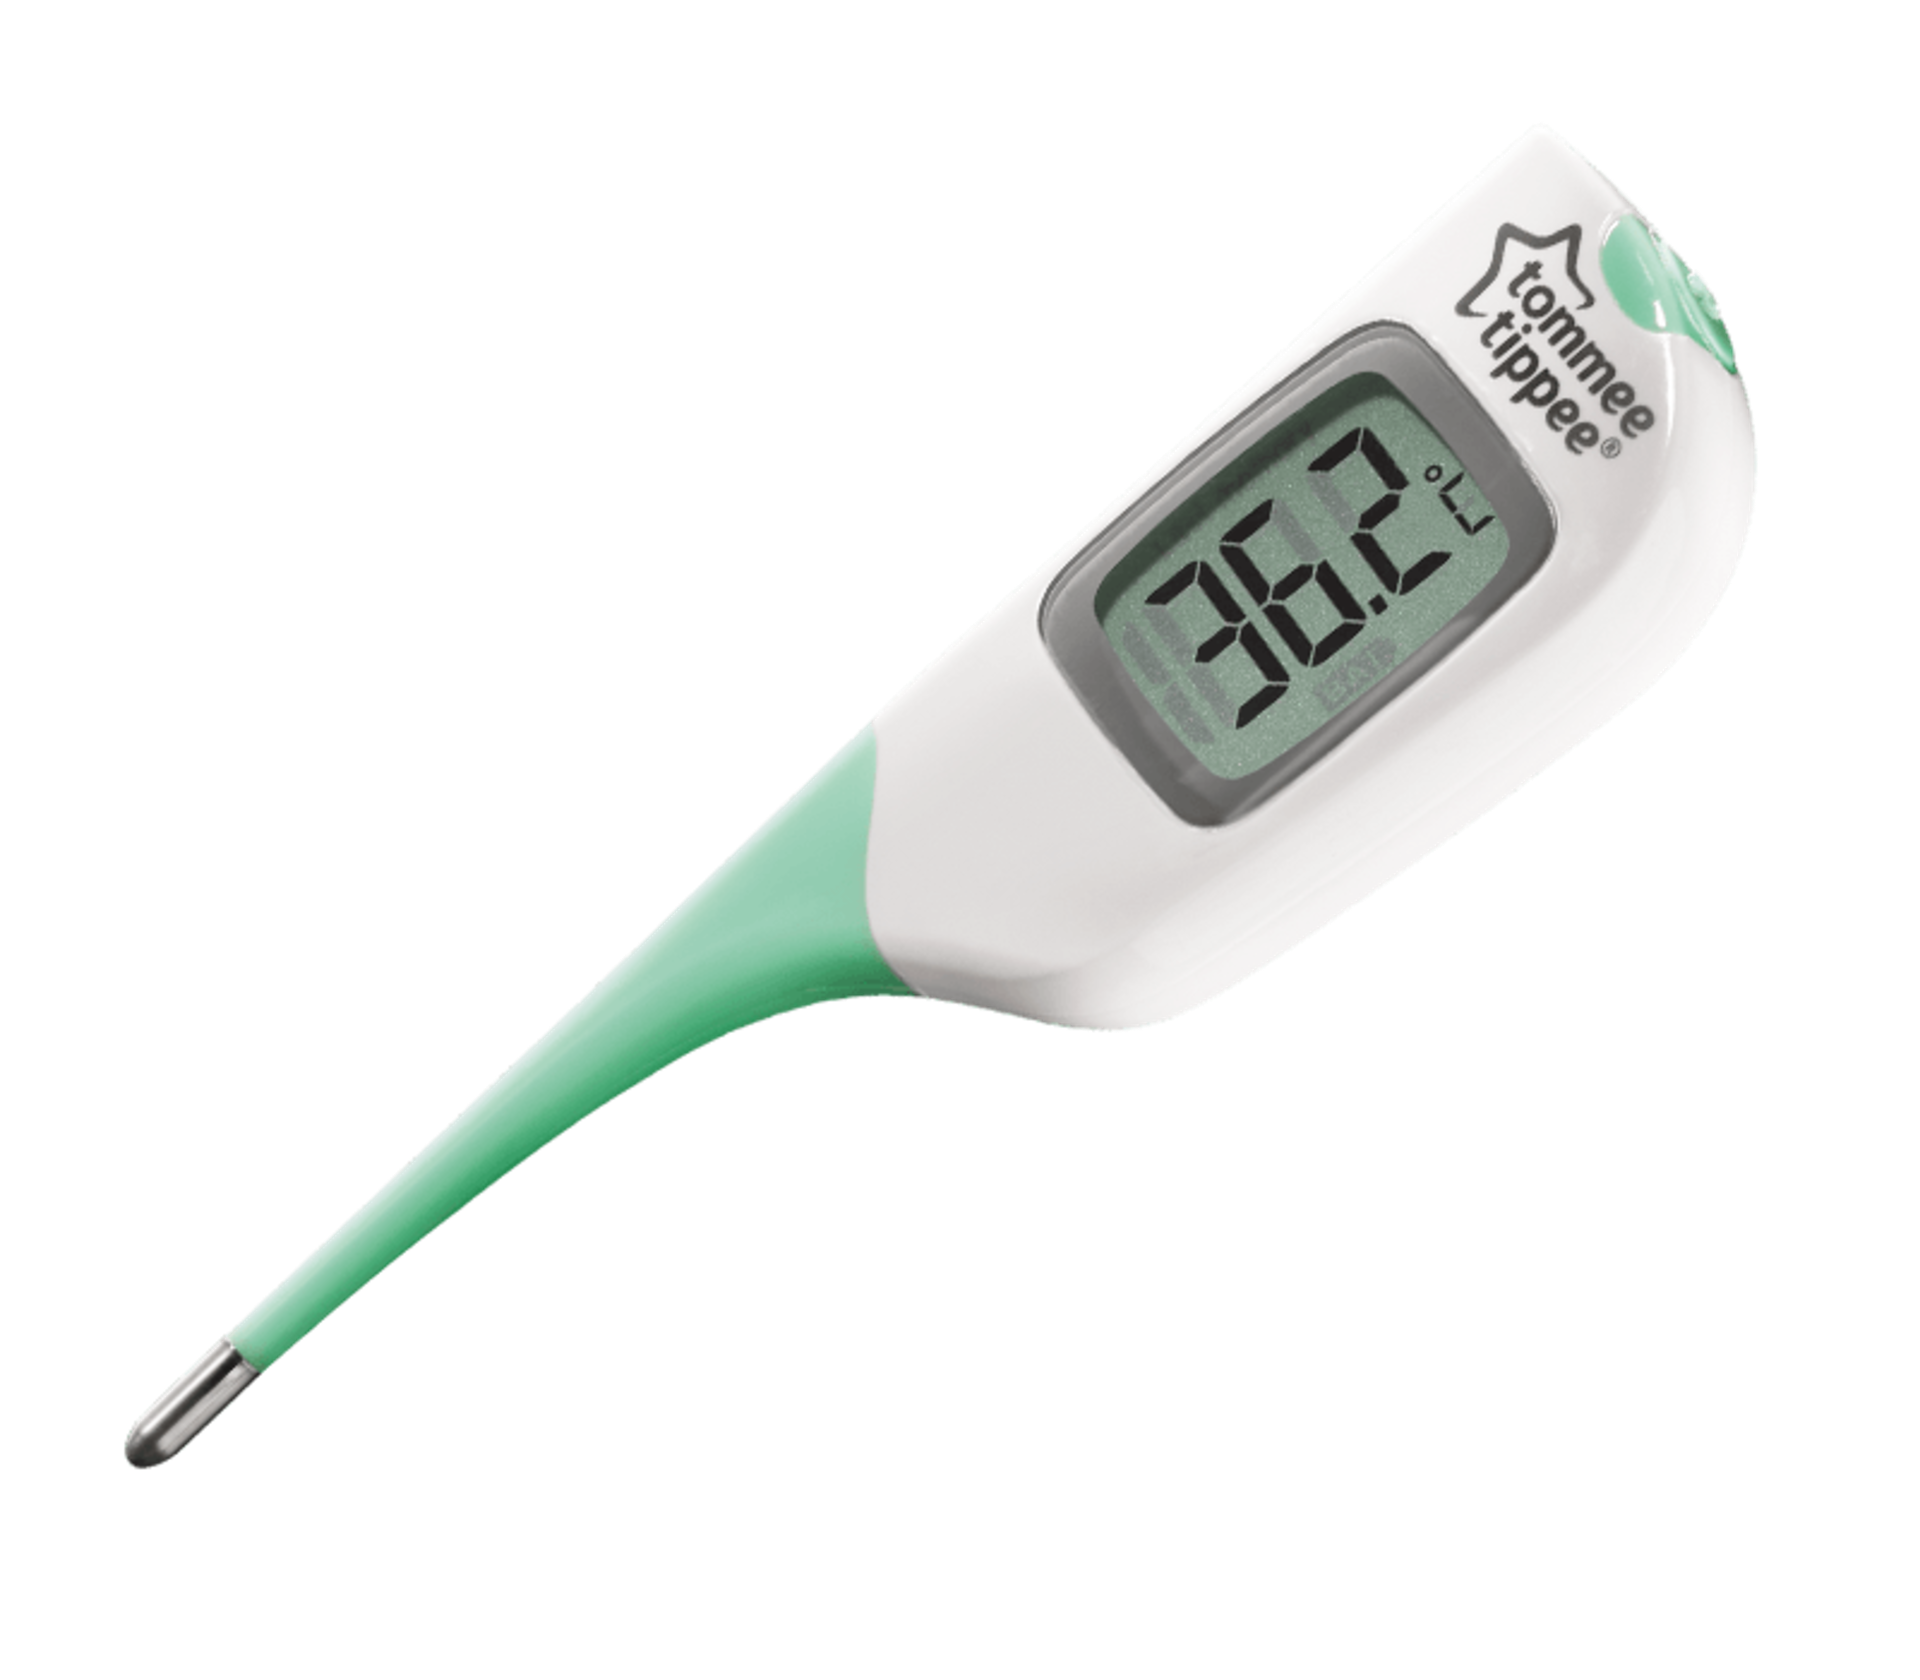 tommee tippee 2-in-1 thermometer - Image 2 of 2